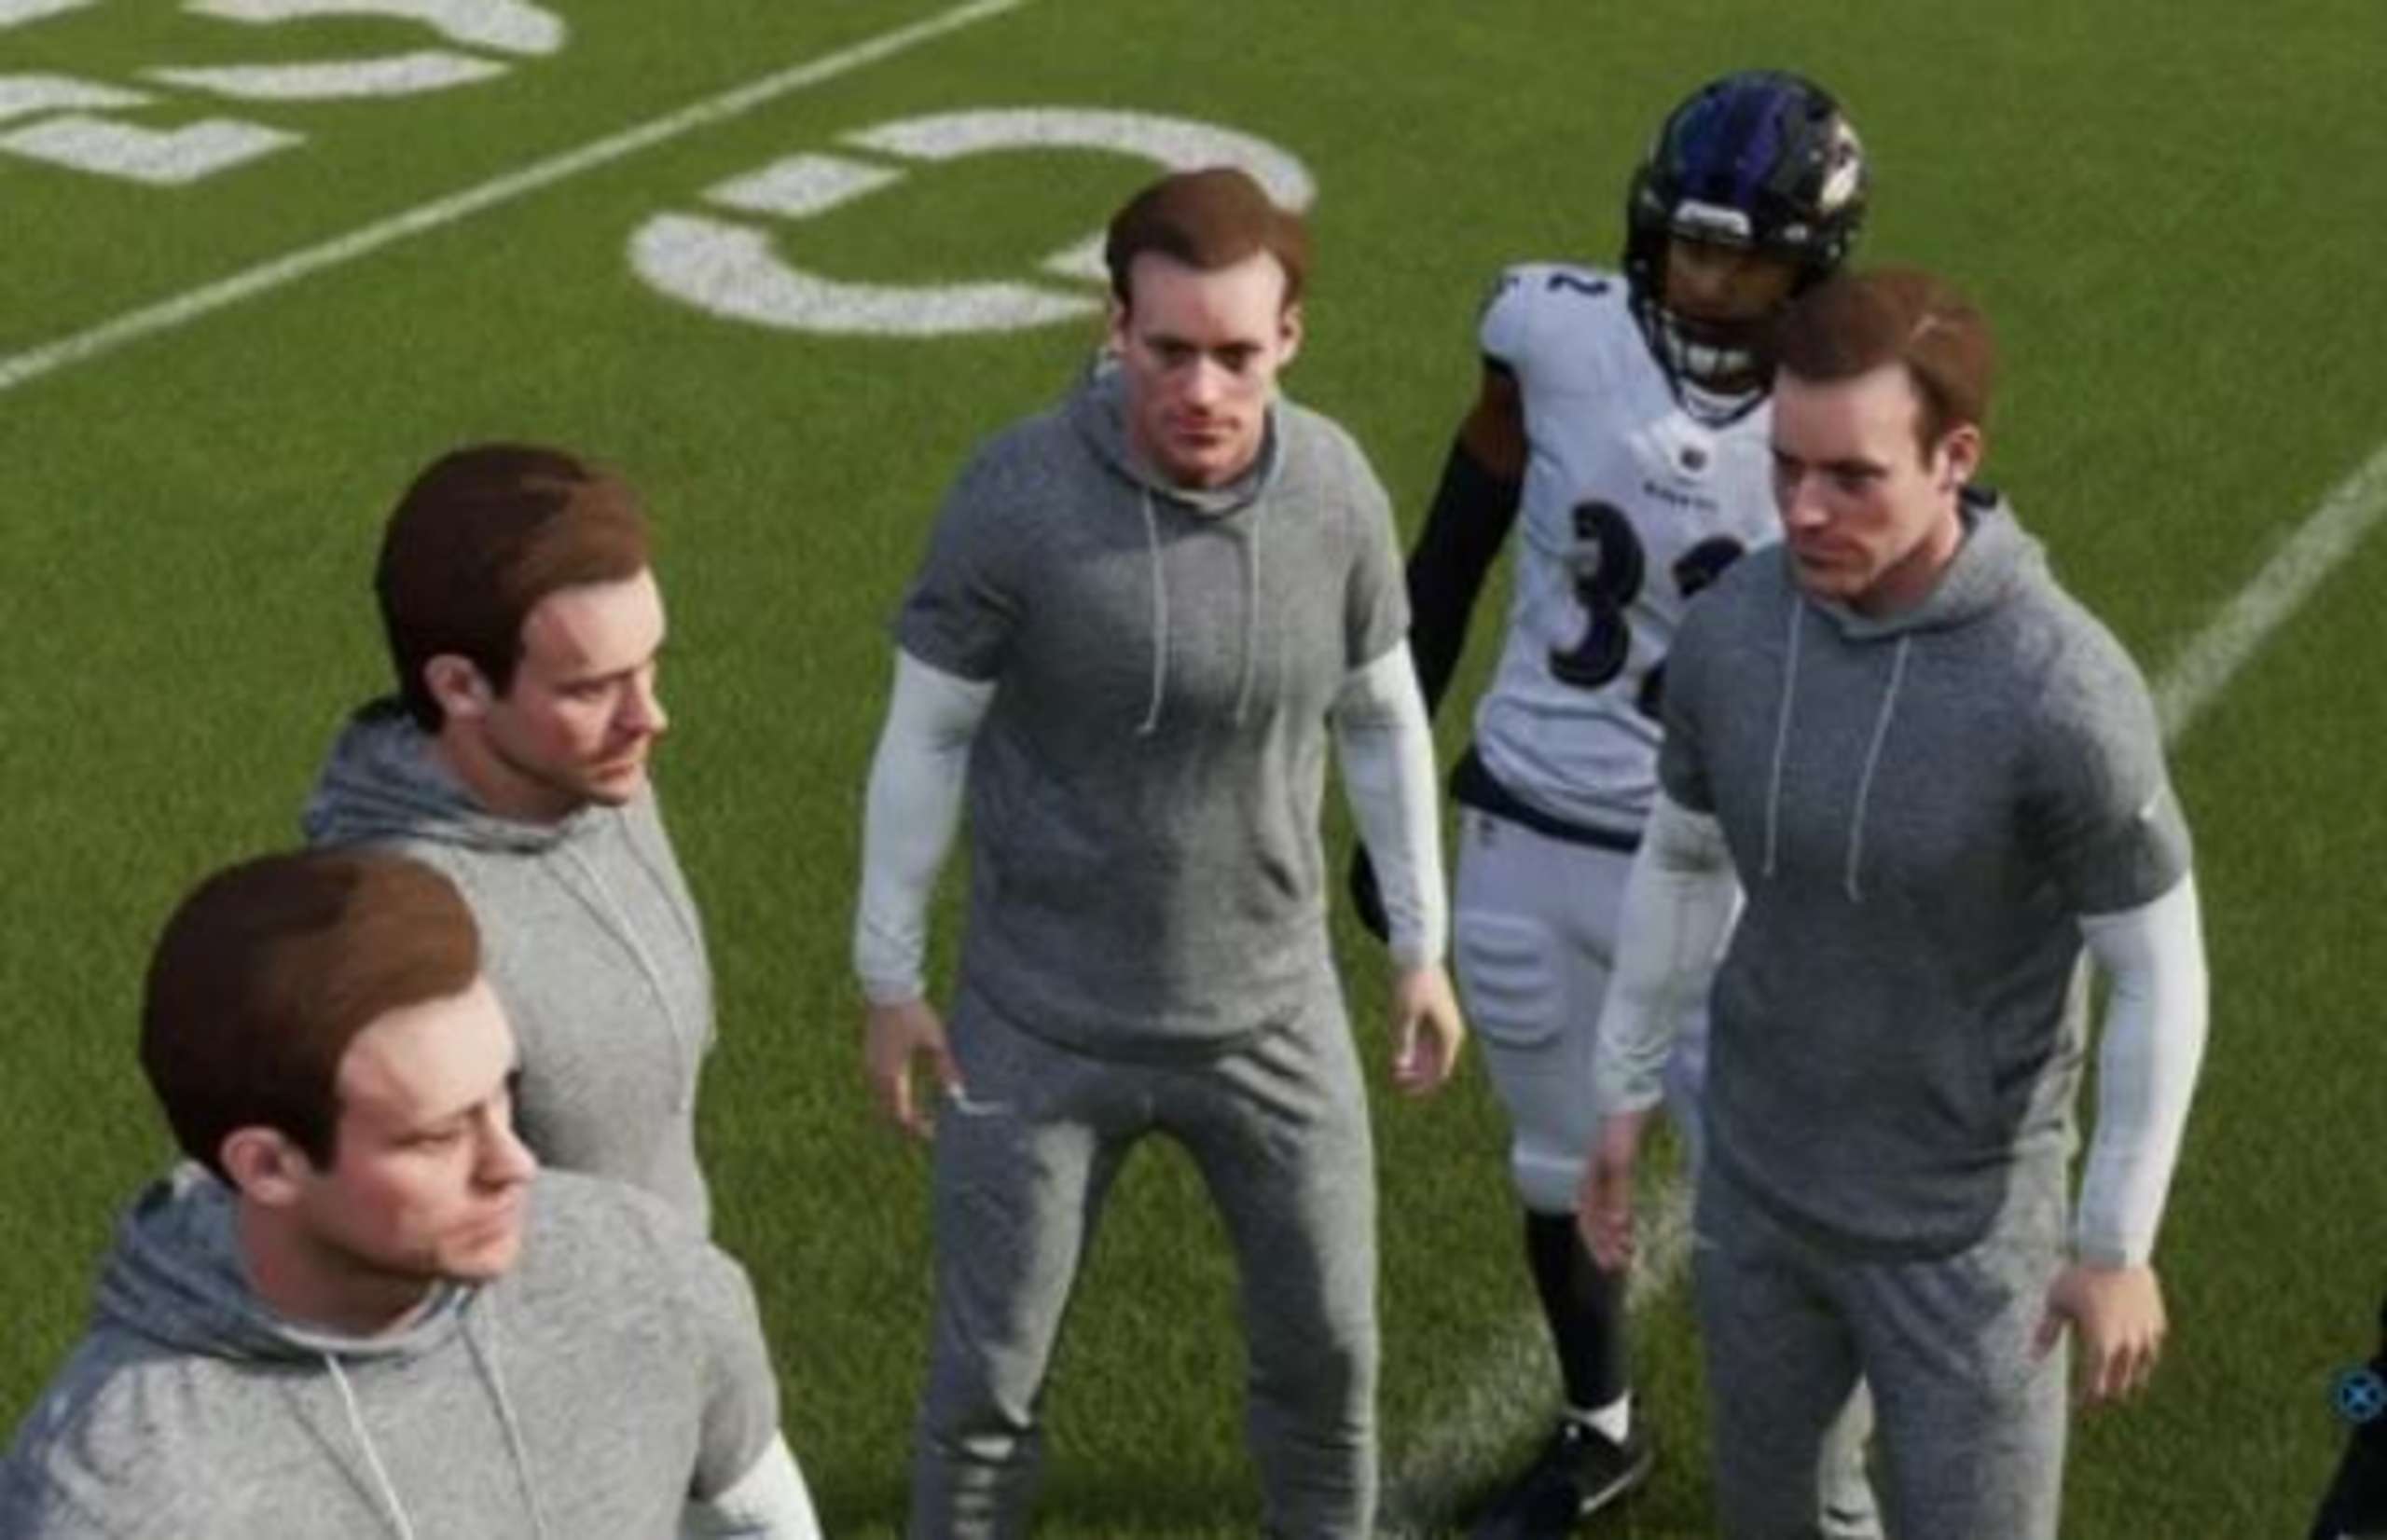 According To Reports, The Franchise Mode In Madden NFL 23 Is Broken After A September Title Update Flooded The Game With Issues